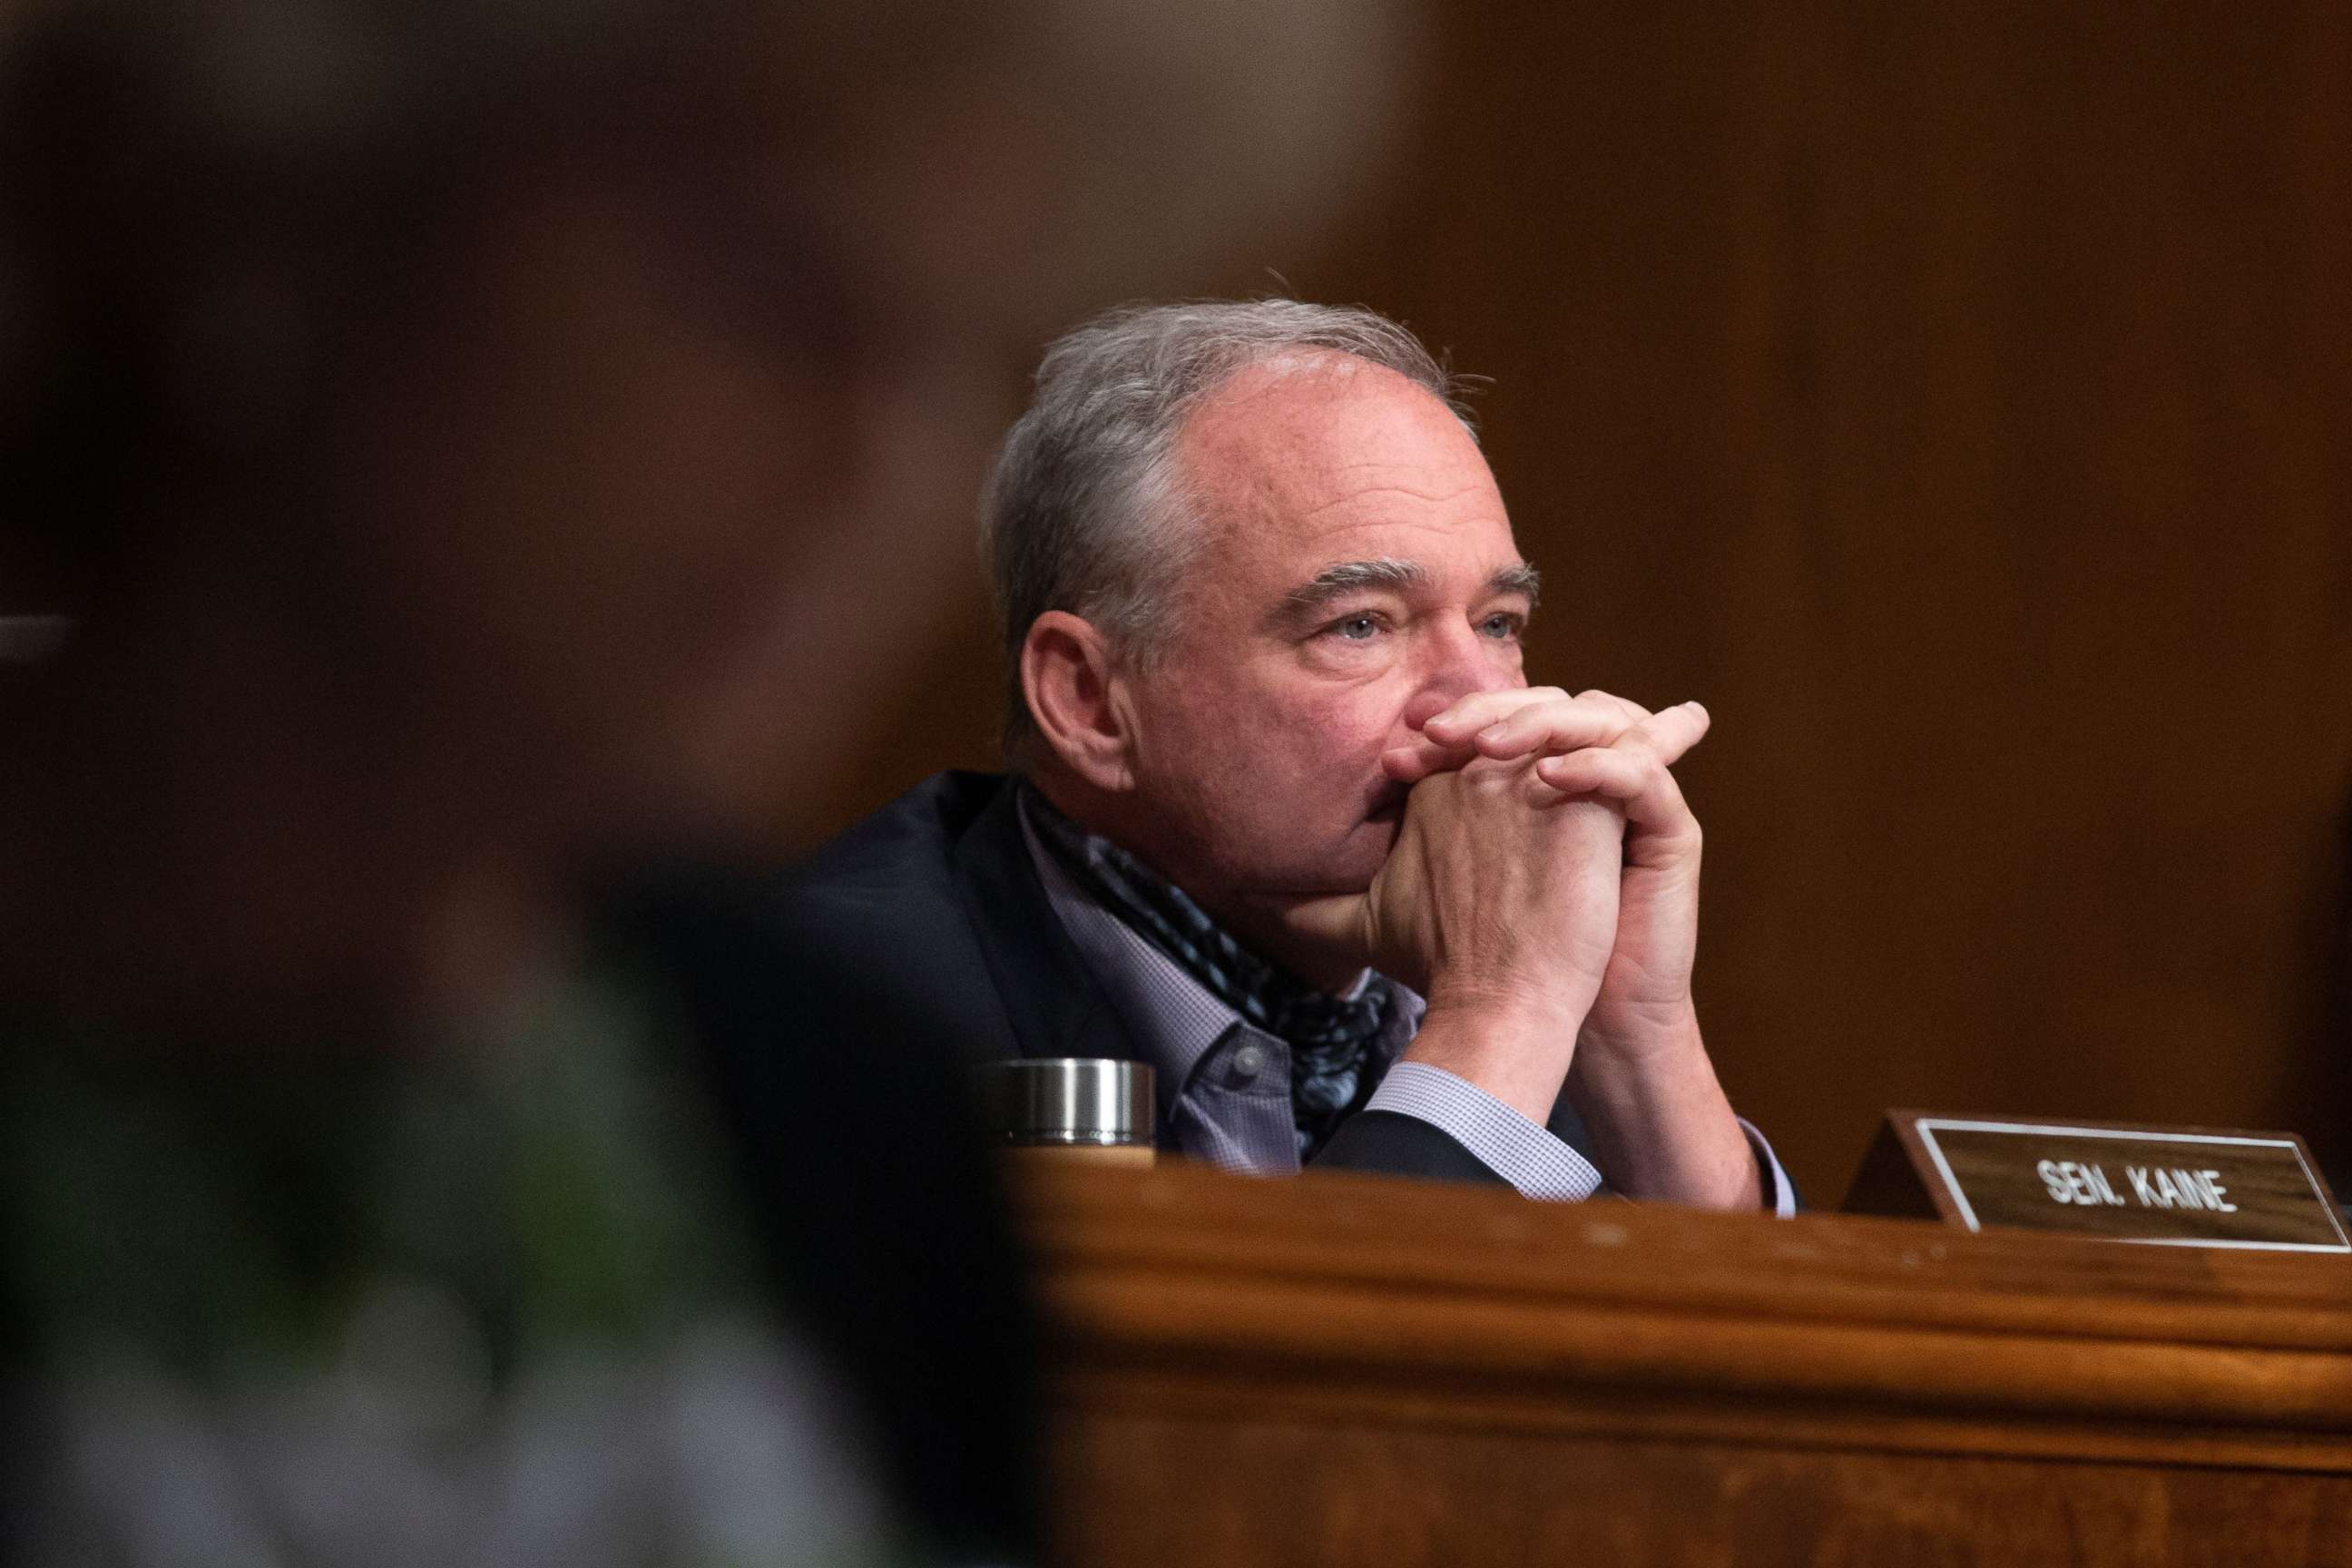 PHOTO: Senator Tim Kaine attends a hearing to examine COVID-19 response on Capitol Hill in Washington, June 23, 2020.